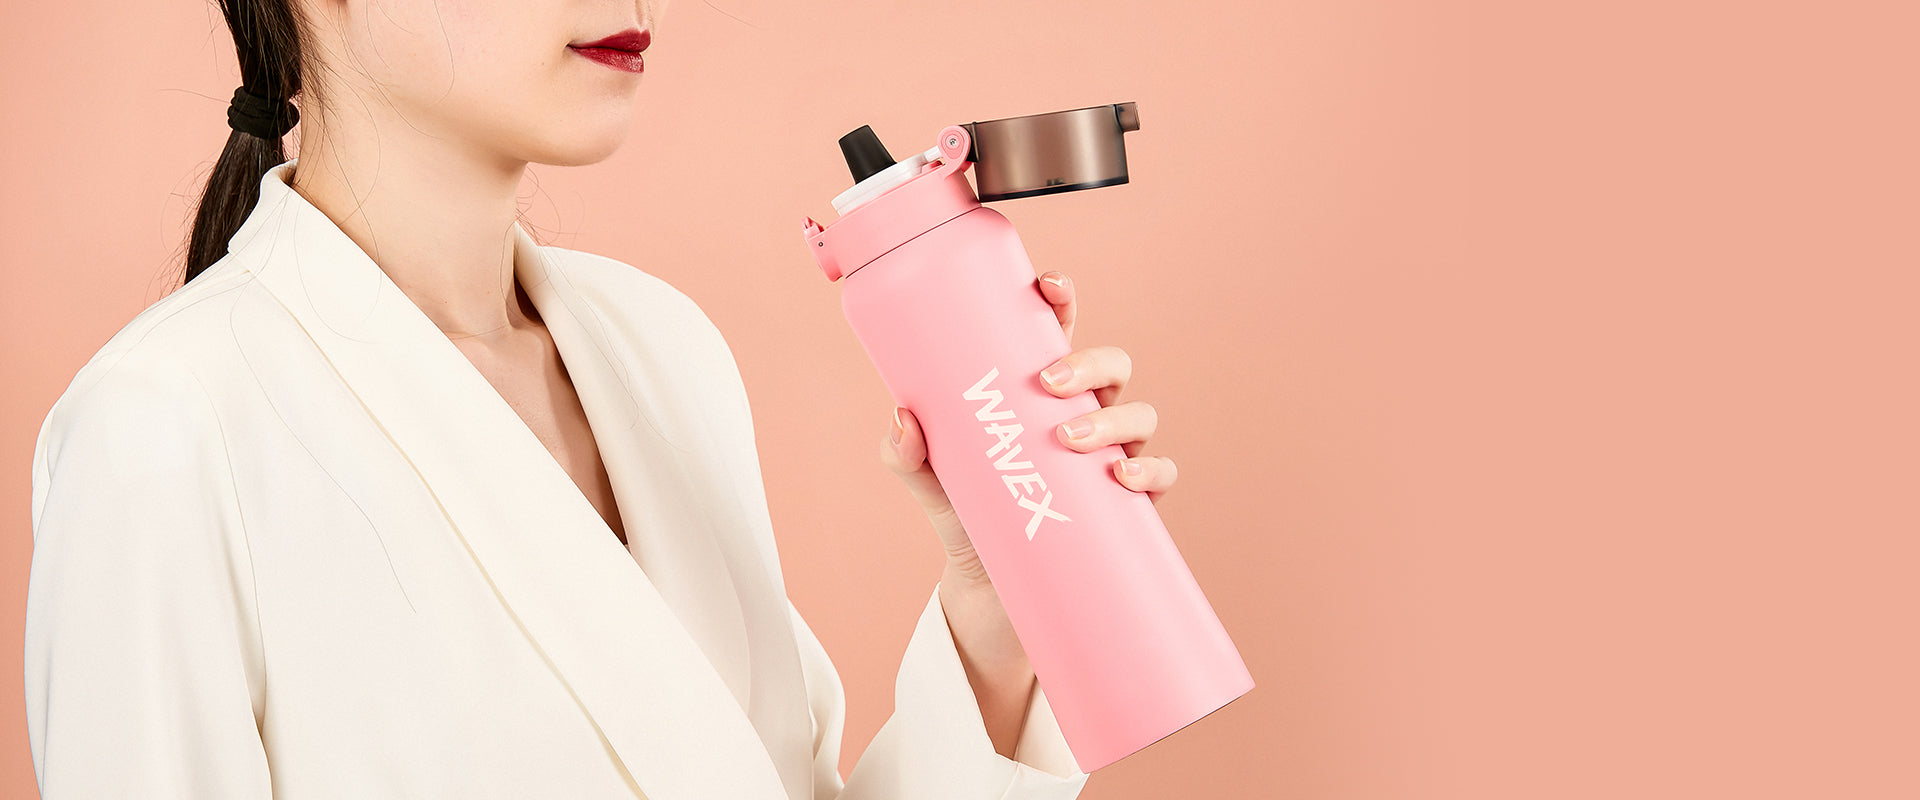 Flavored stainless steel bottles for hydration